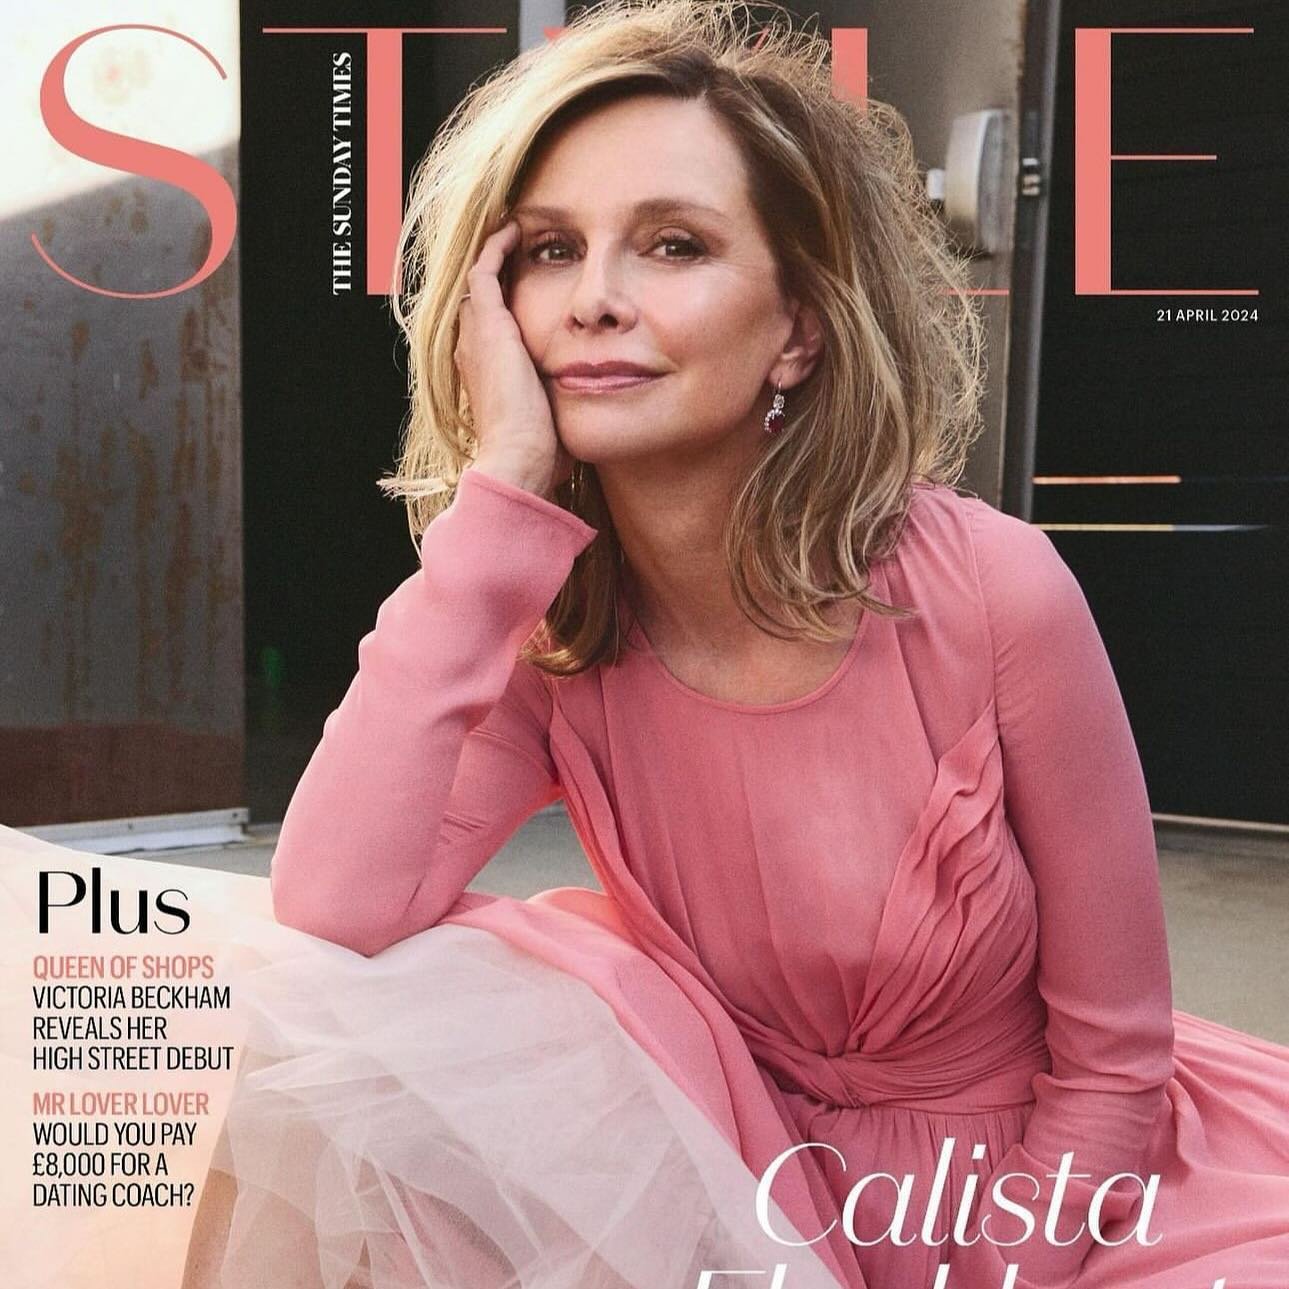 Cover. #calistaflockhart on the cover of the @theststyle wearing @mindimondny #yayapublicity #finejewelry # jewels #rubellite earrings. 🩷 @elizabethstewart1 @jordan_grossman